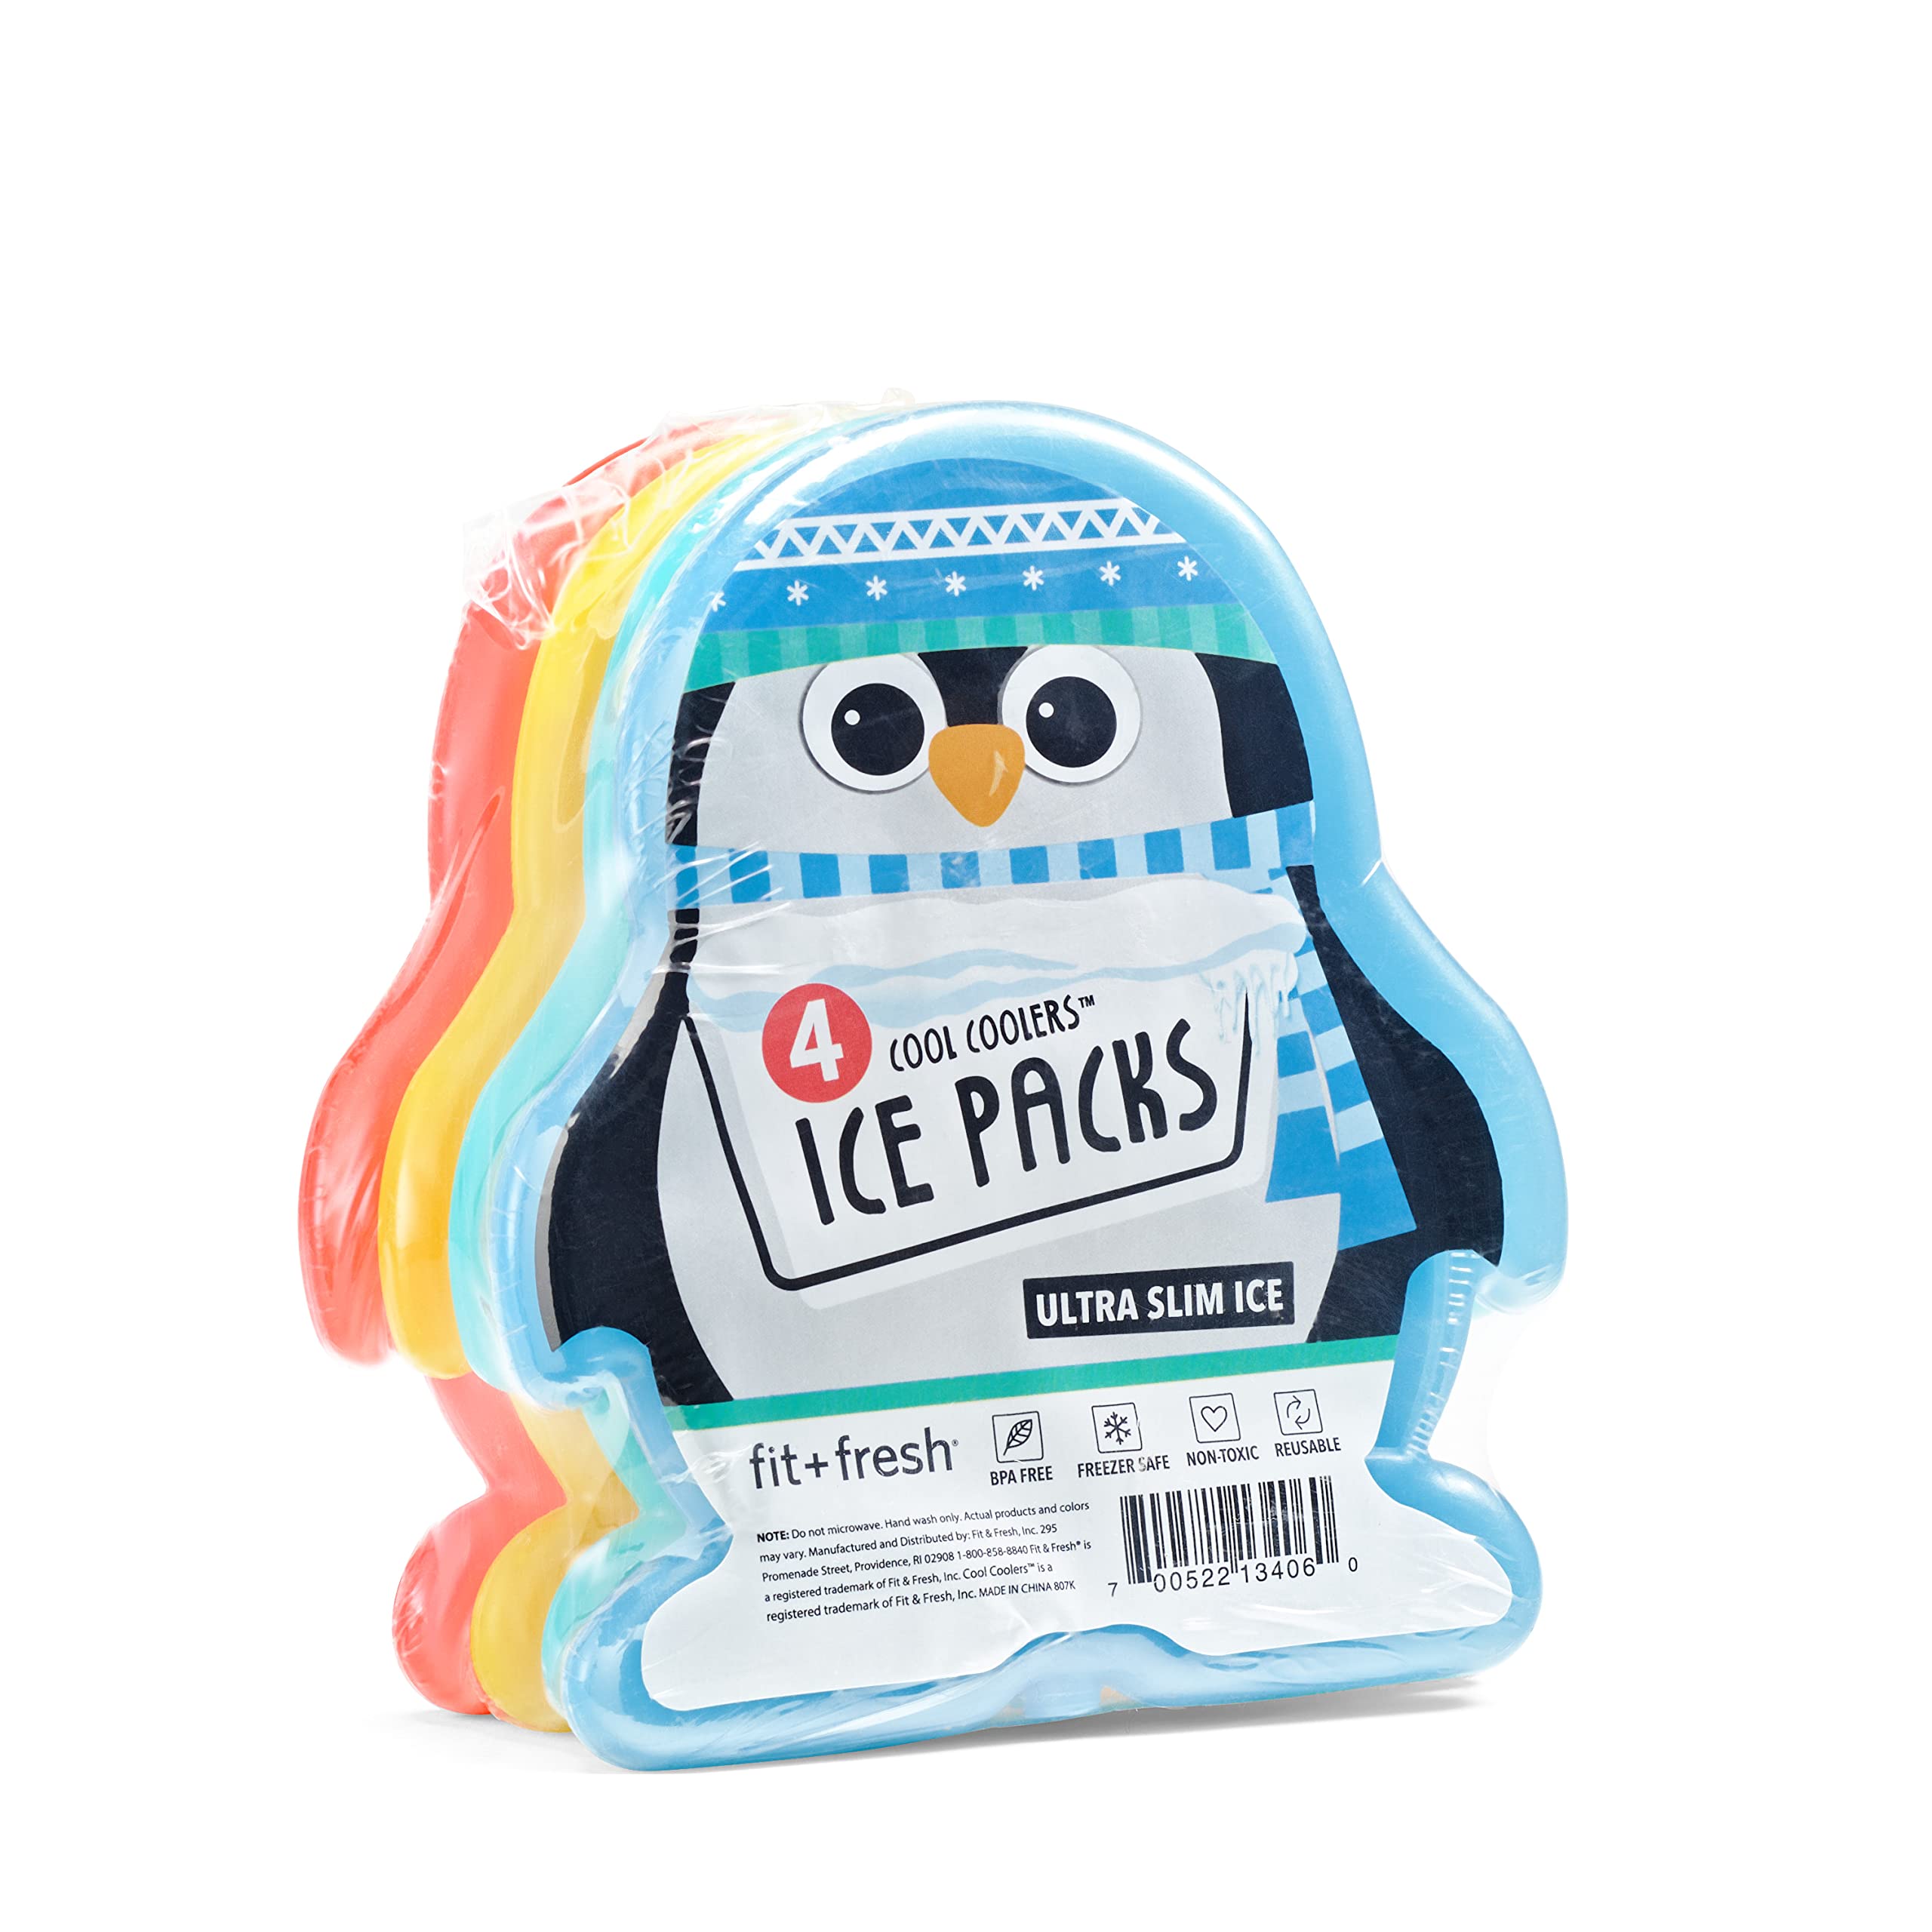 Fit & Fressh Shaped Slim Ice Packs, Colorful & Reusable, Perfect for Kids Insulated Lunch Bag, Bento Box, & More, Penguins